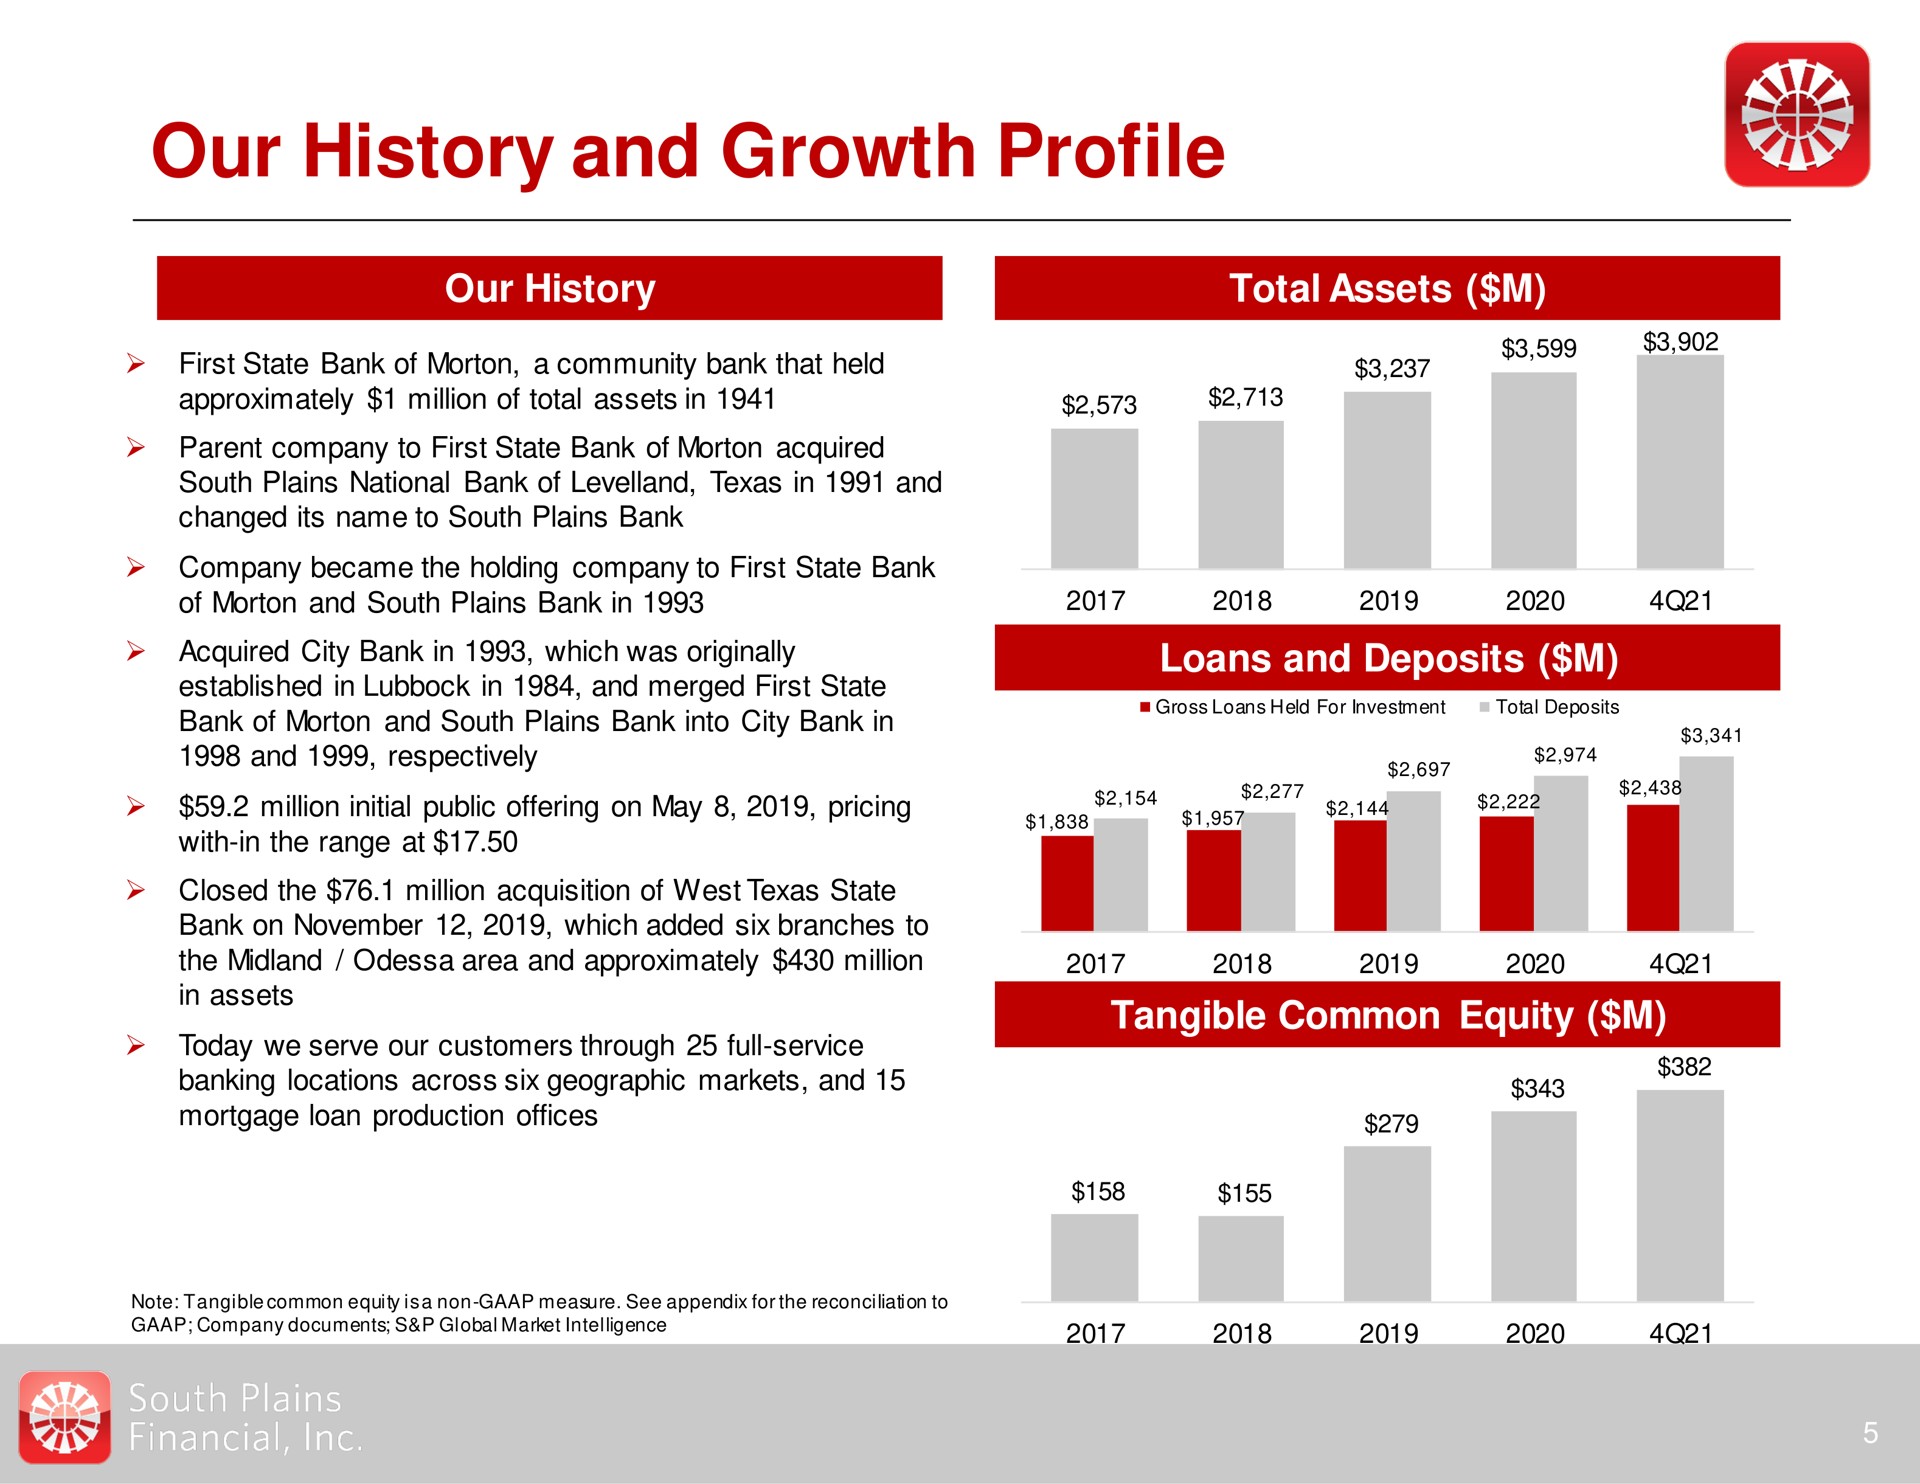 our history and growth profile | South Plains Financial